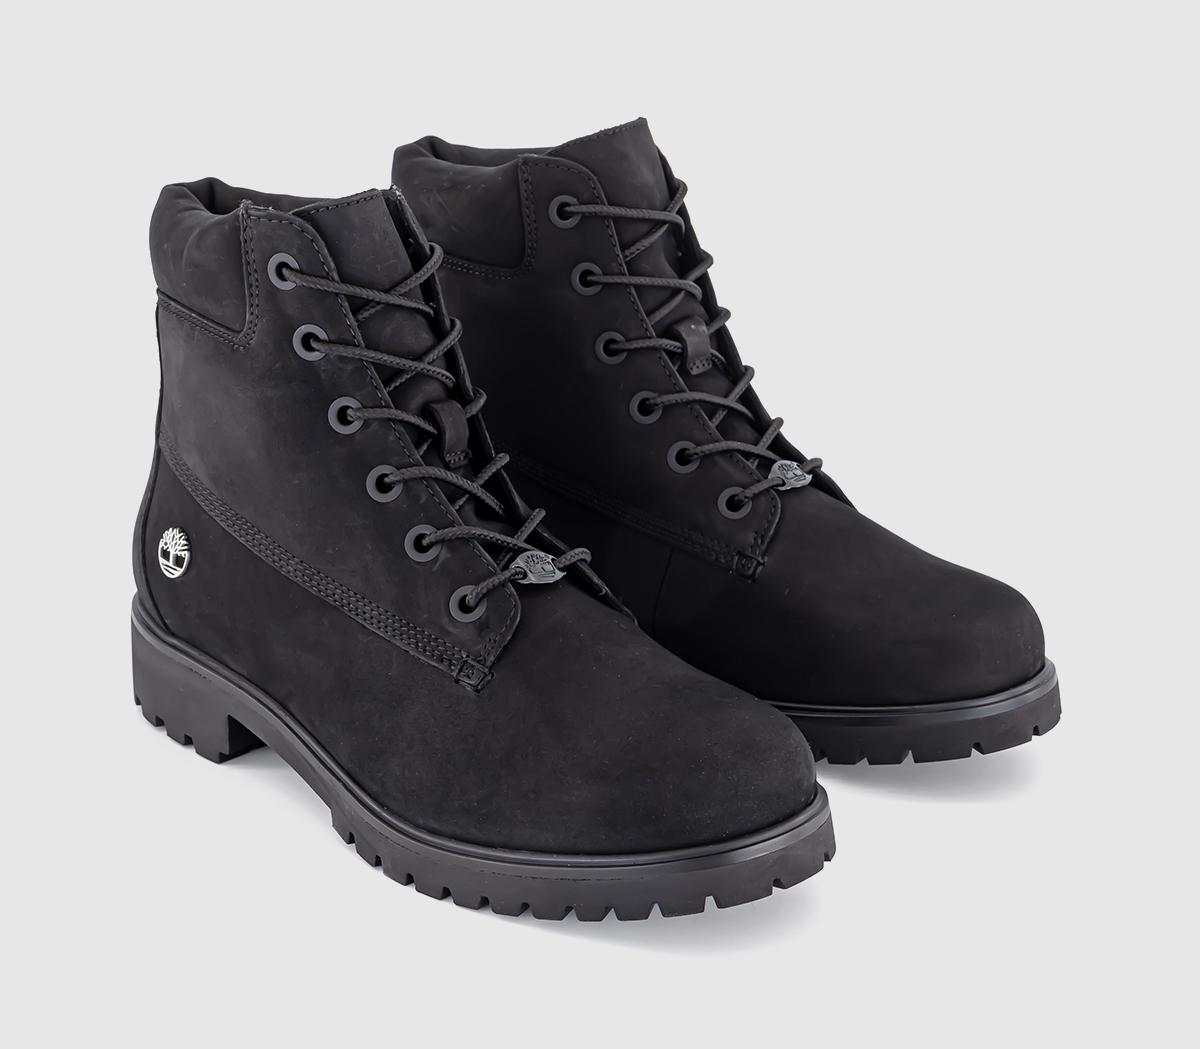 Timberland Lyonsdale Boots Black - Women's Ankle Boots